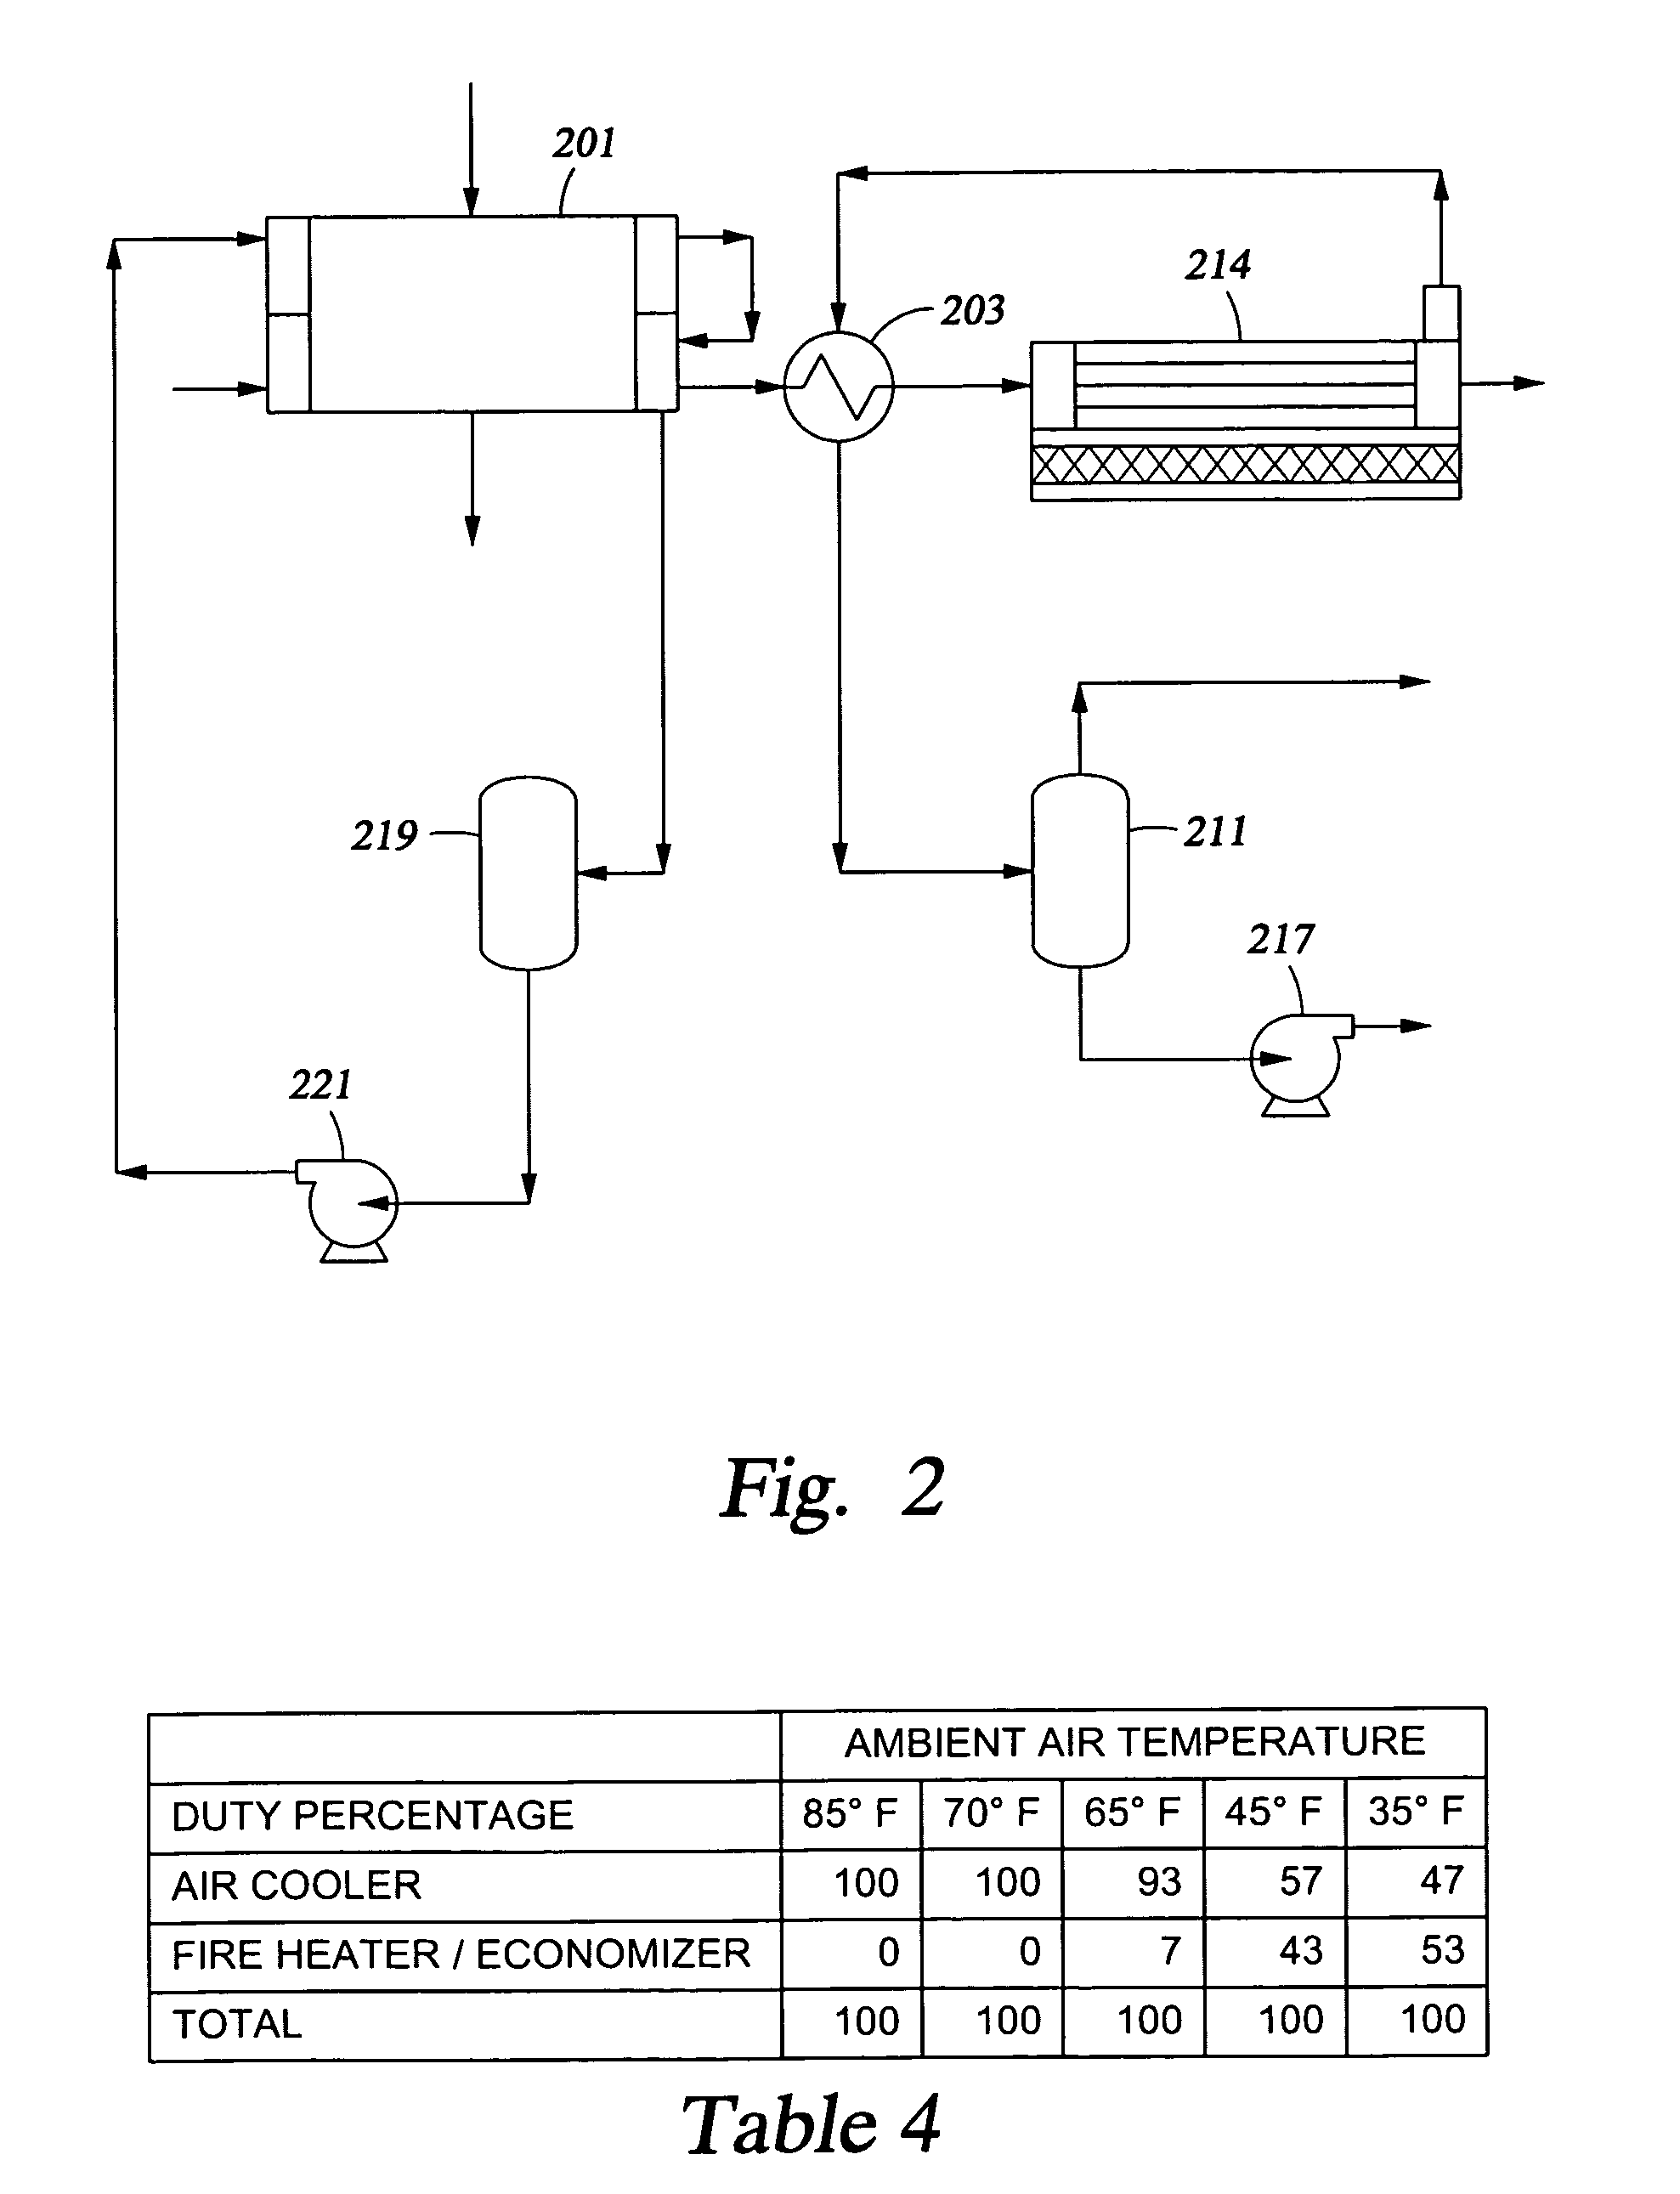 Apparatus and methods for converting a cryogenic fluid into gas